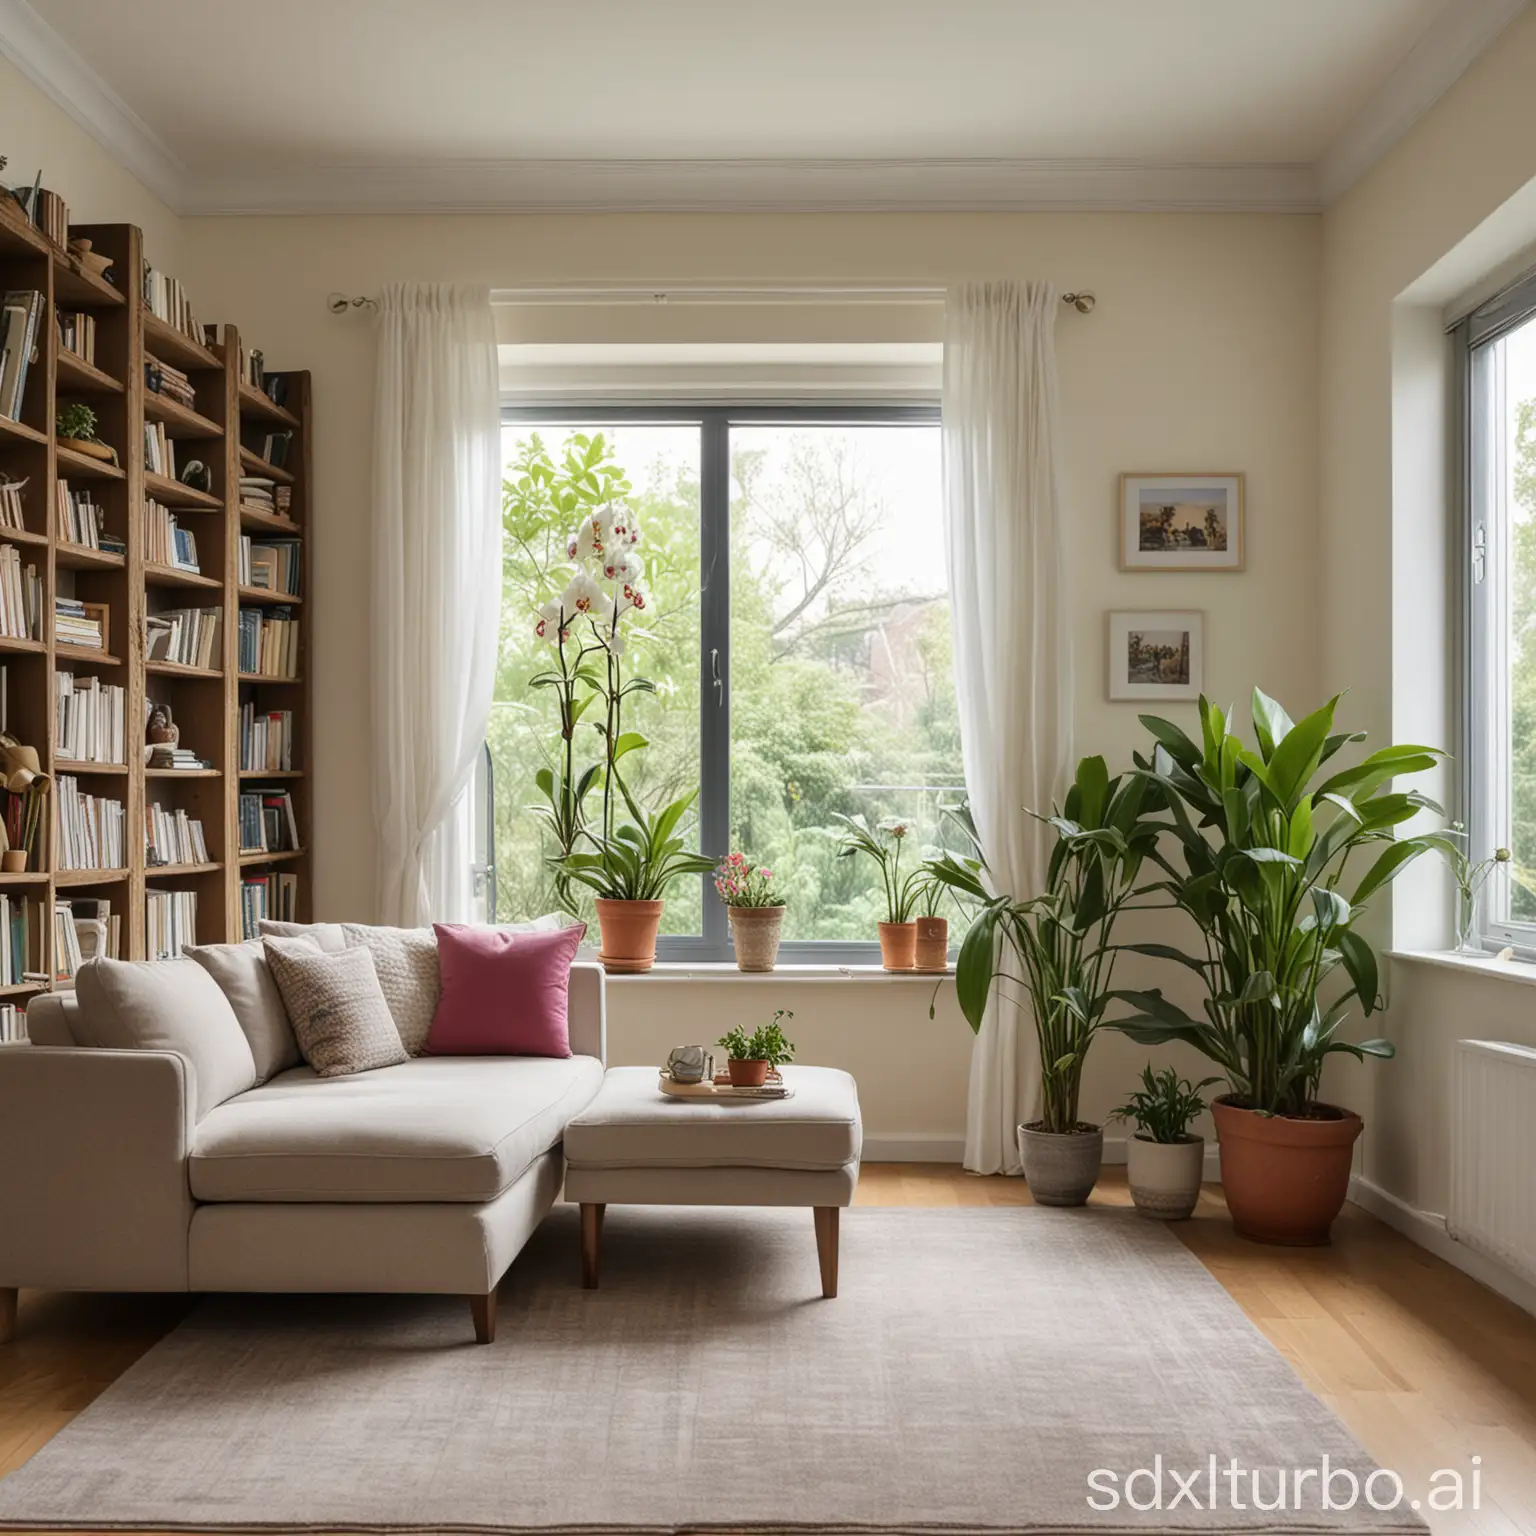 Cozy-Living-Room-Interior-with-Sofa-Bookcase-Flower-Pot-and-Orchid-Plant